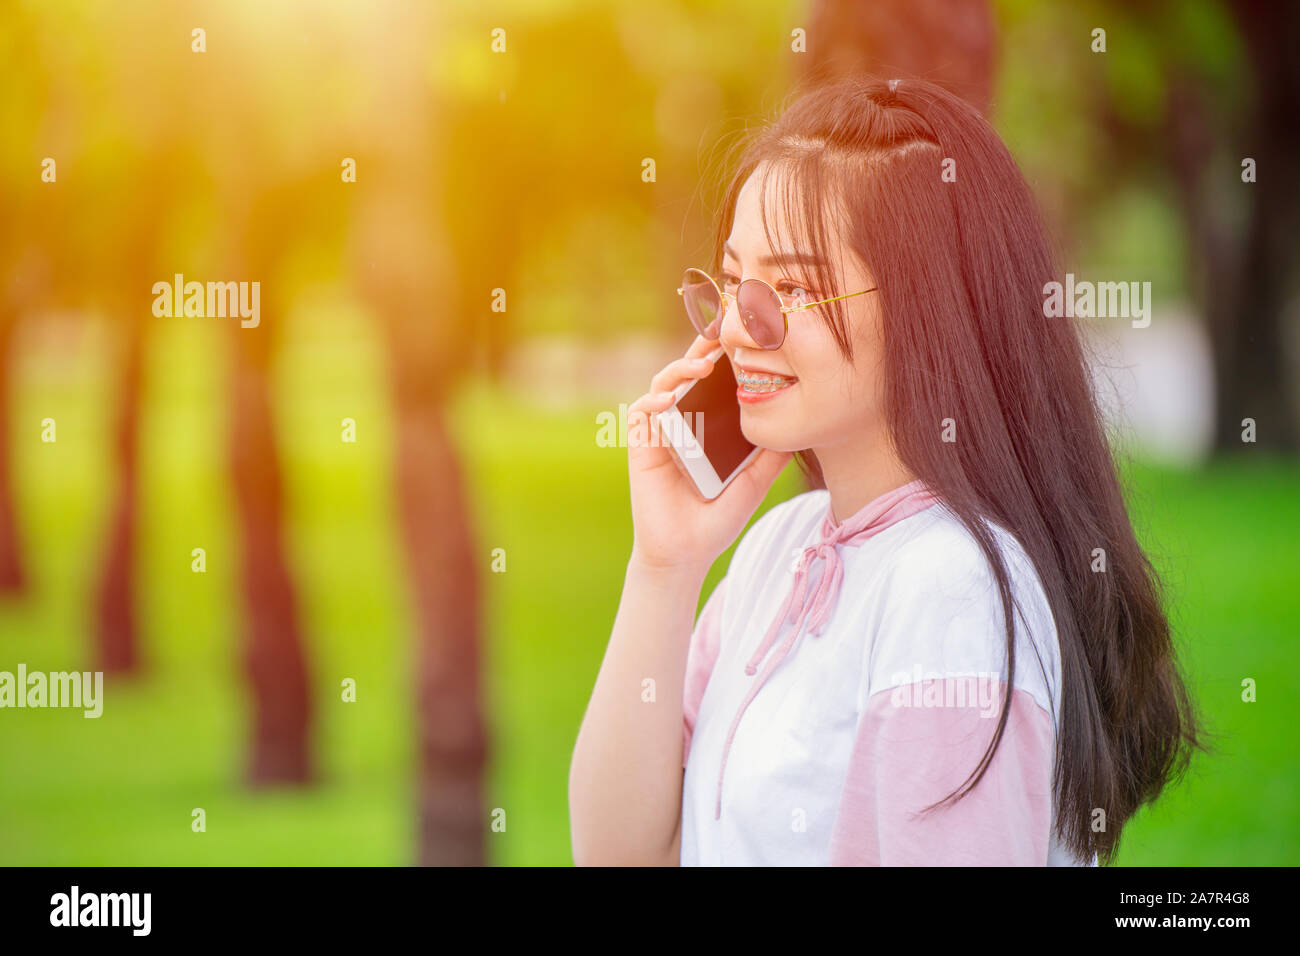 Girl teen on smartphone calling talking happy smile green outdor nature background. Stock Photo